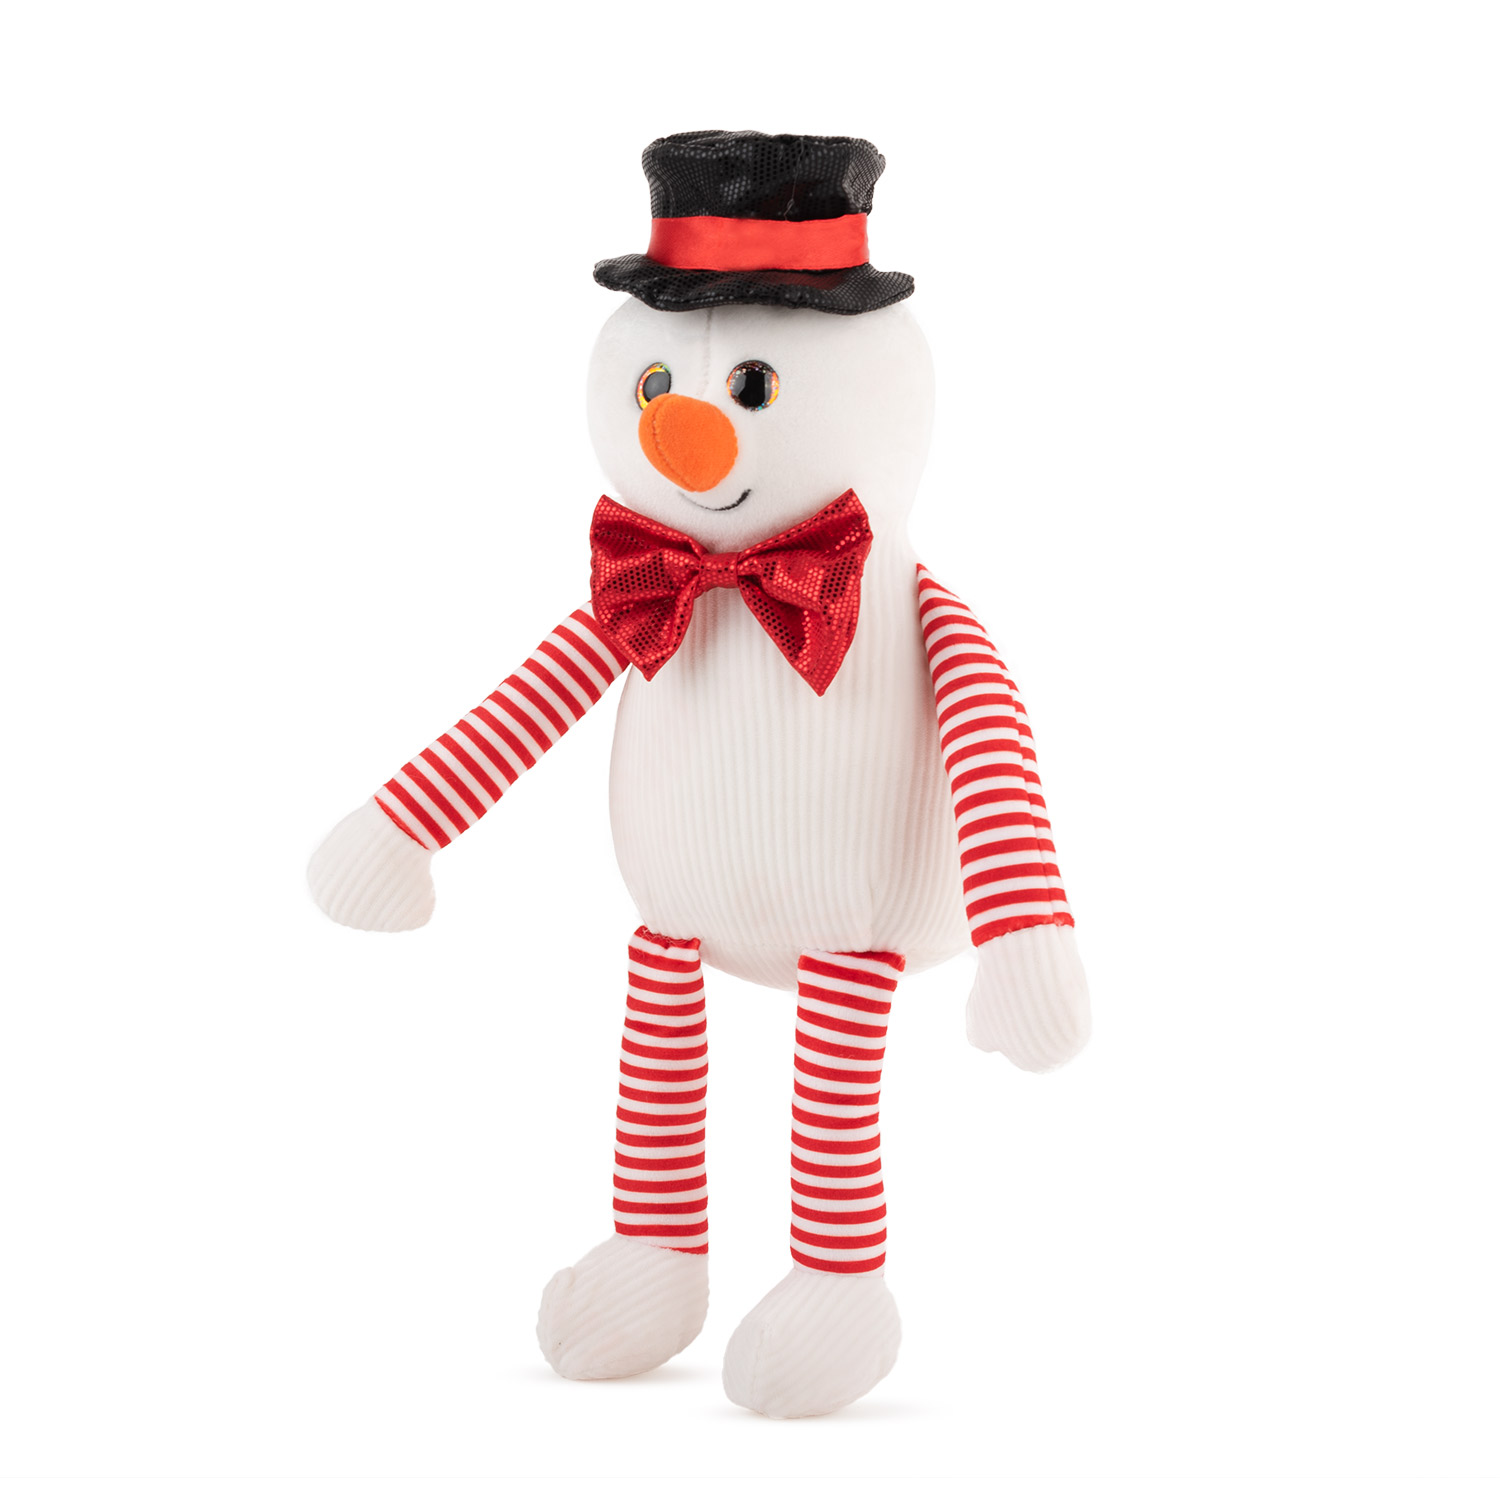 Snowman with hat and bow tie